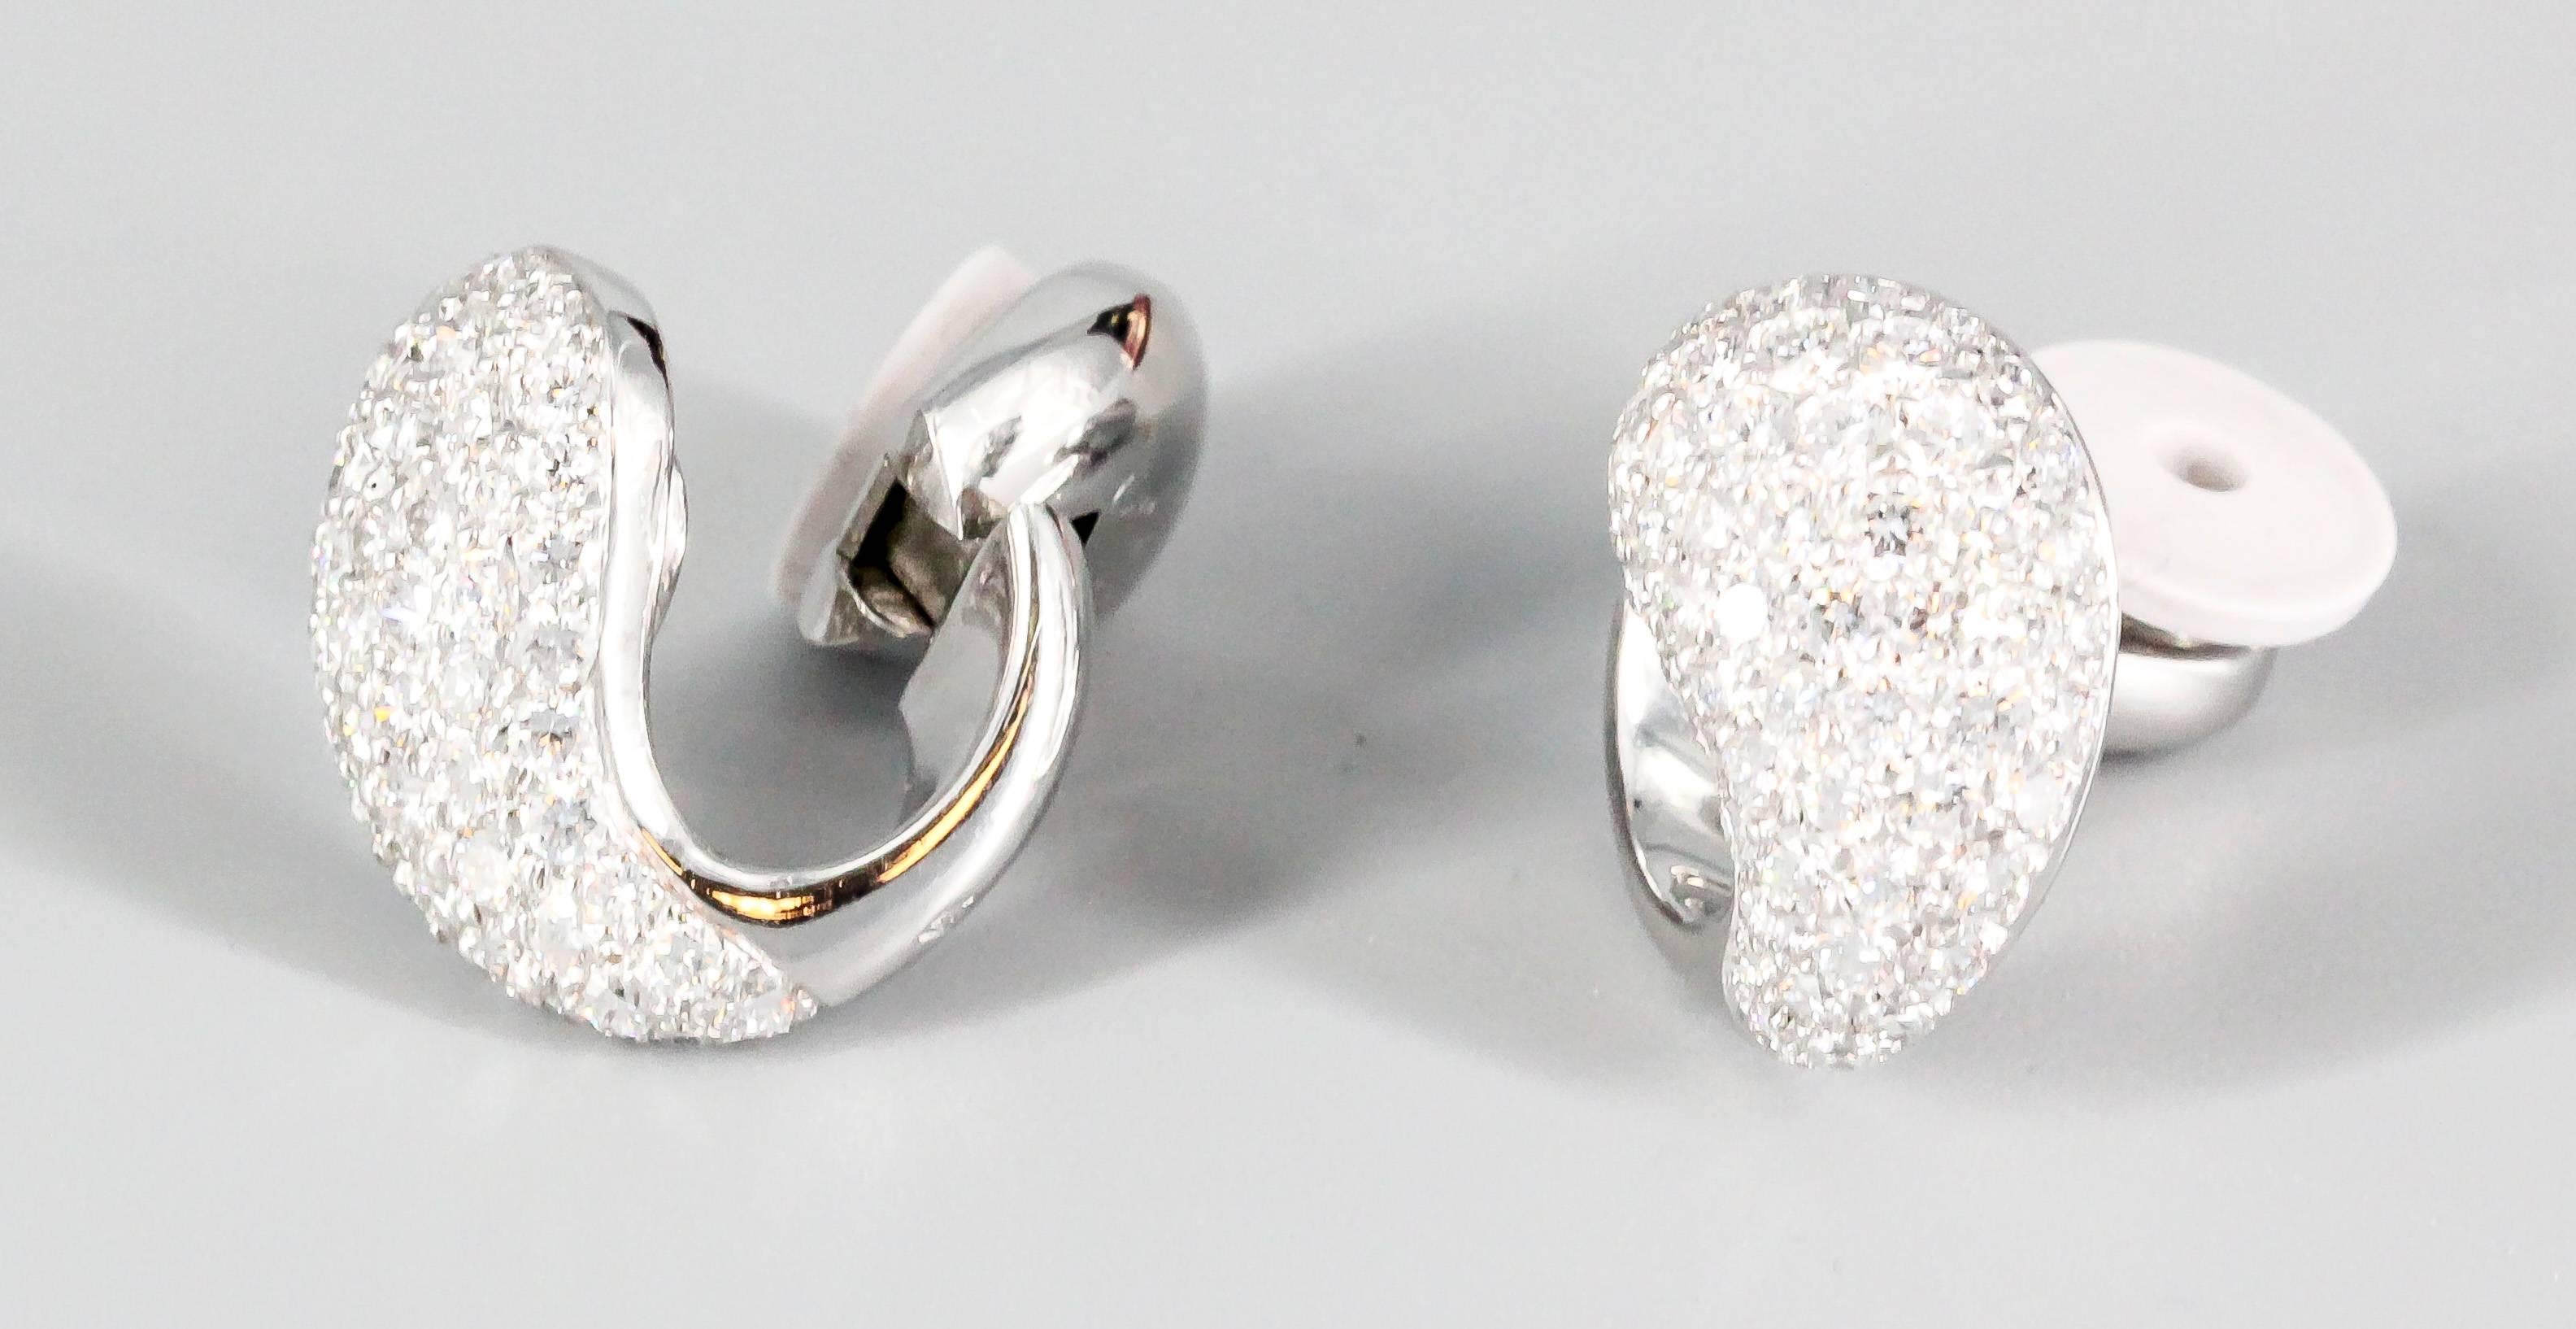 Elegant 18 white gold and diamond earrings from the 